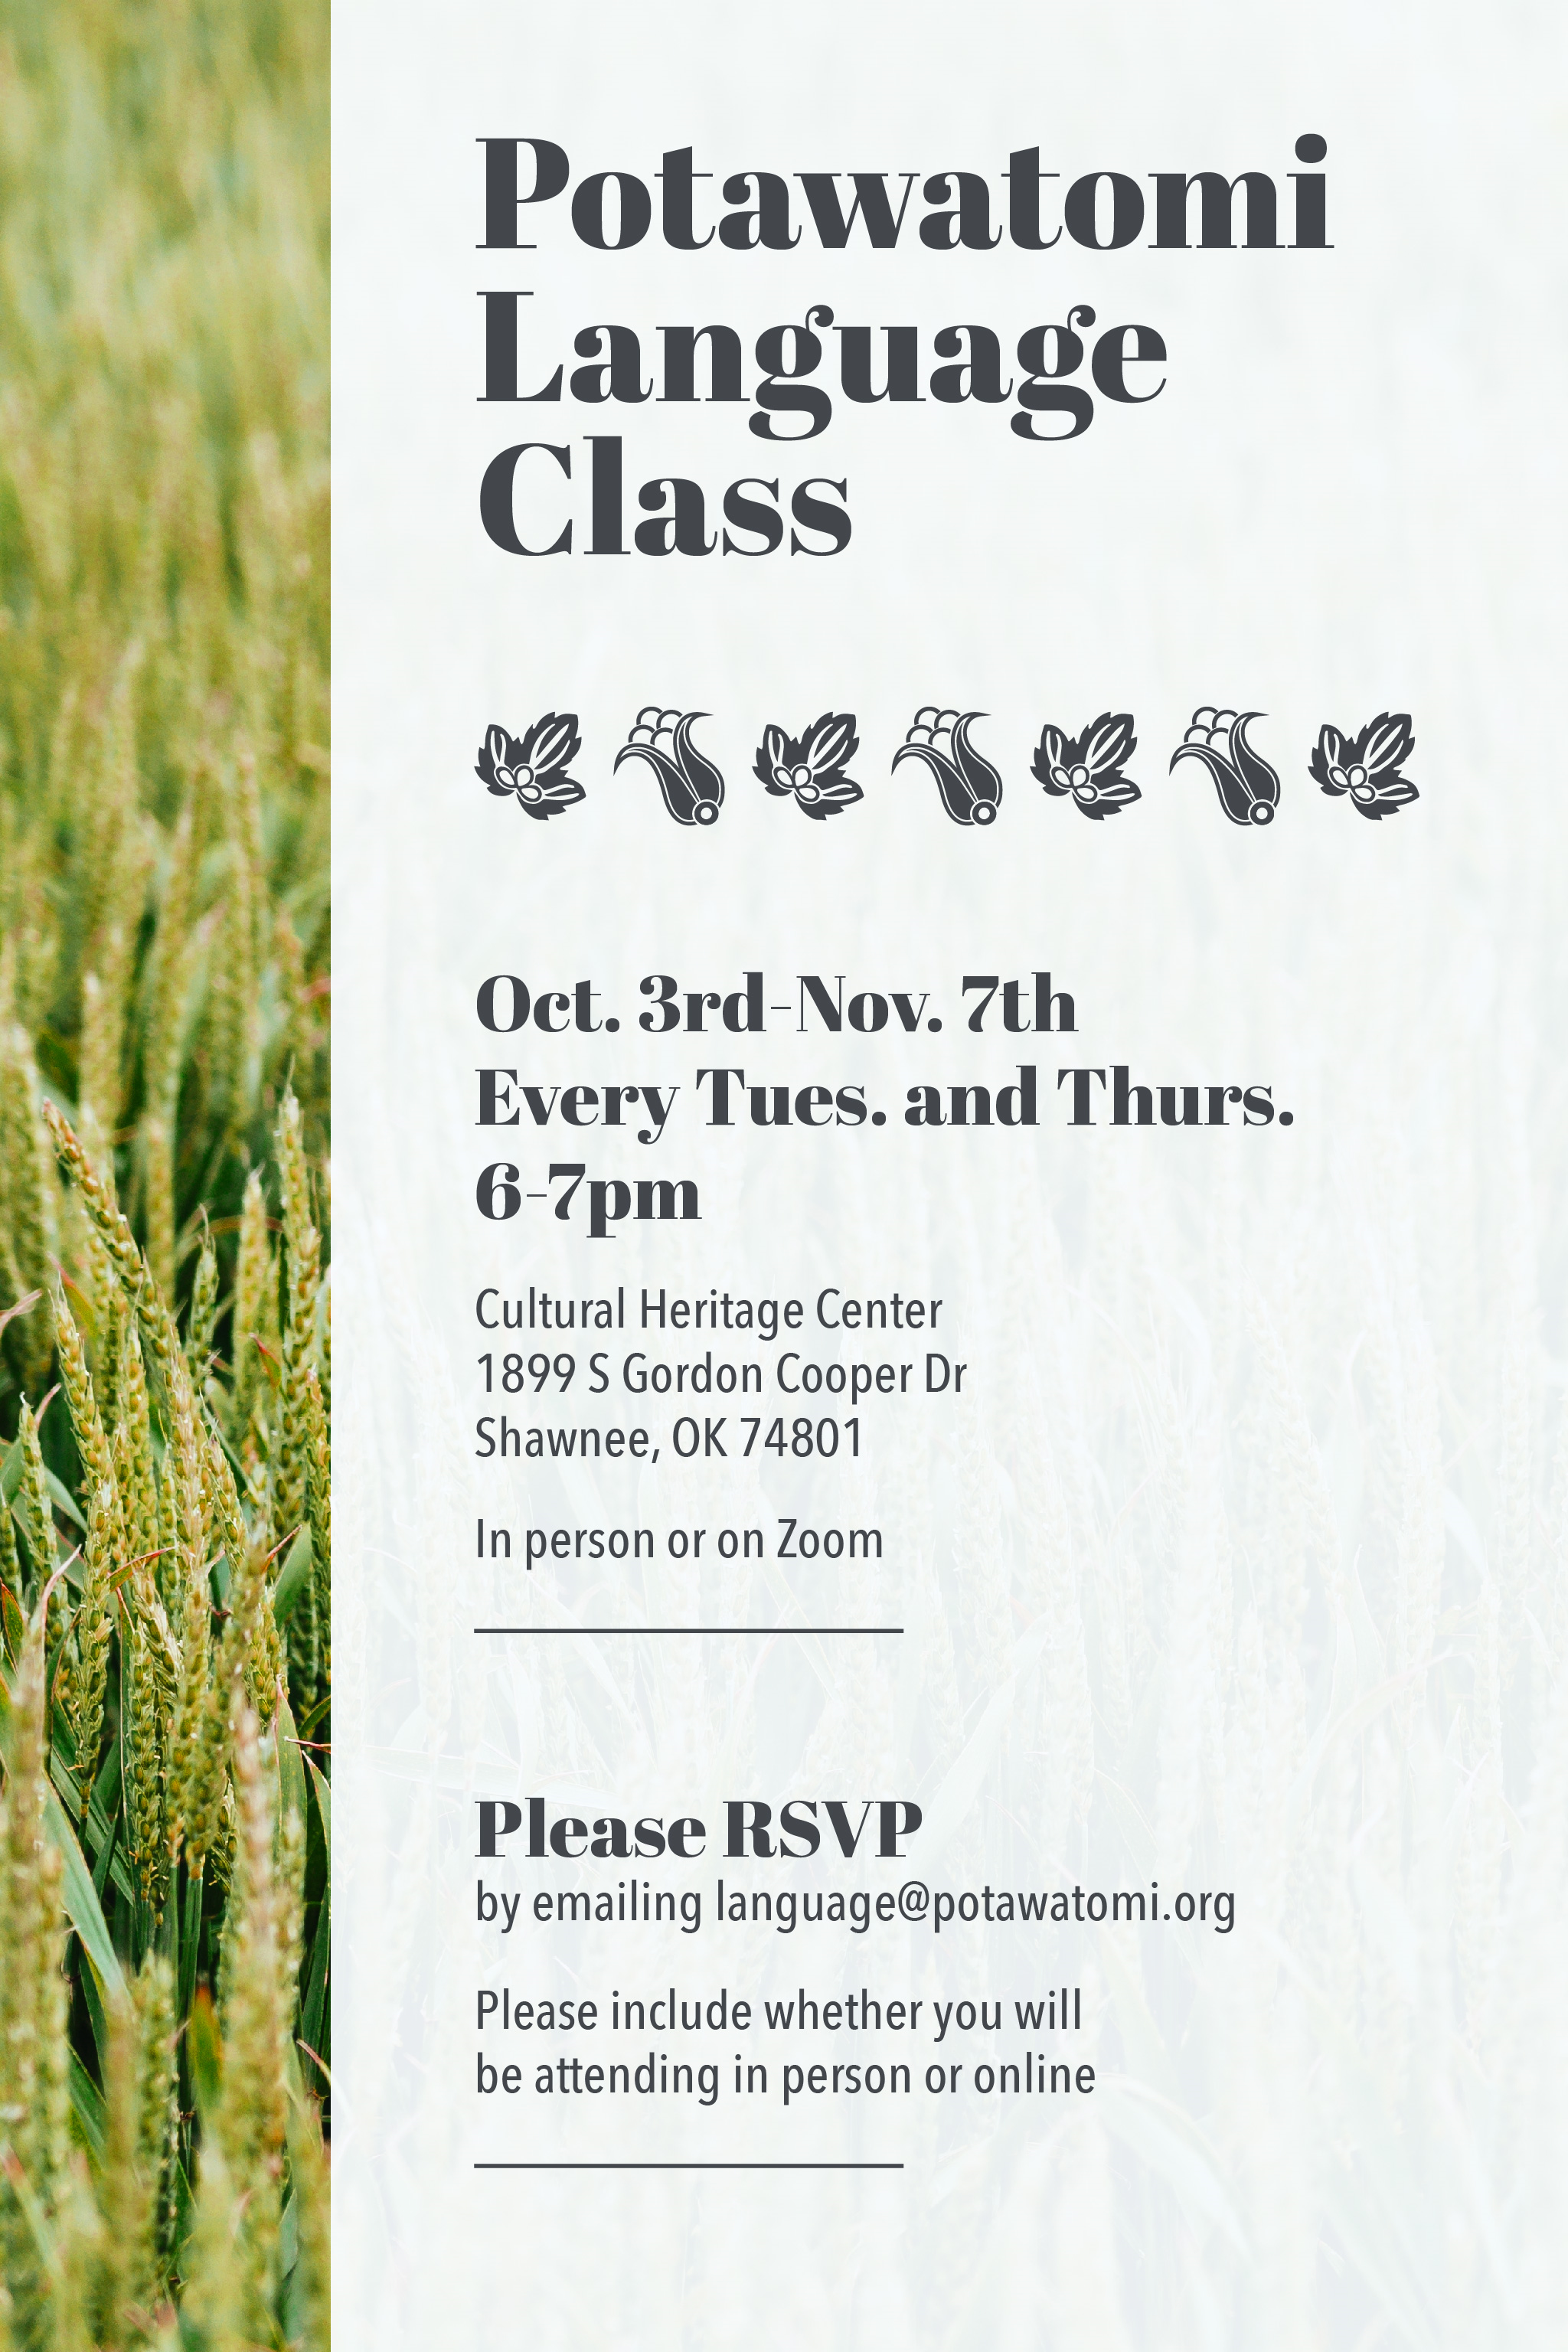 An elegant flyer with a photo of corn tassels down one side advertises the Tuesday/Thursday Potawatomi Language Course in October 2023.